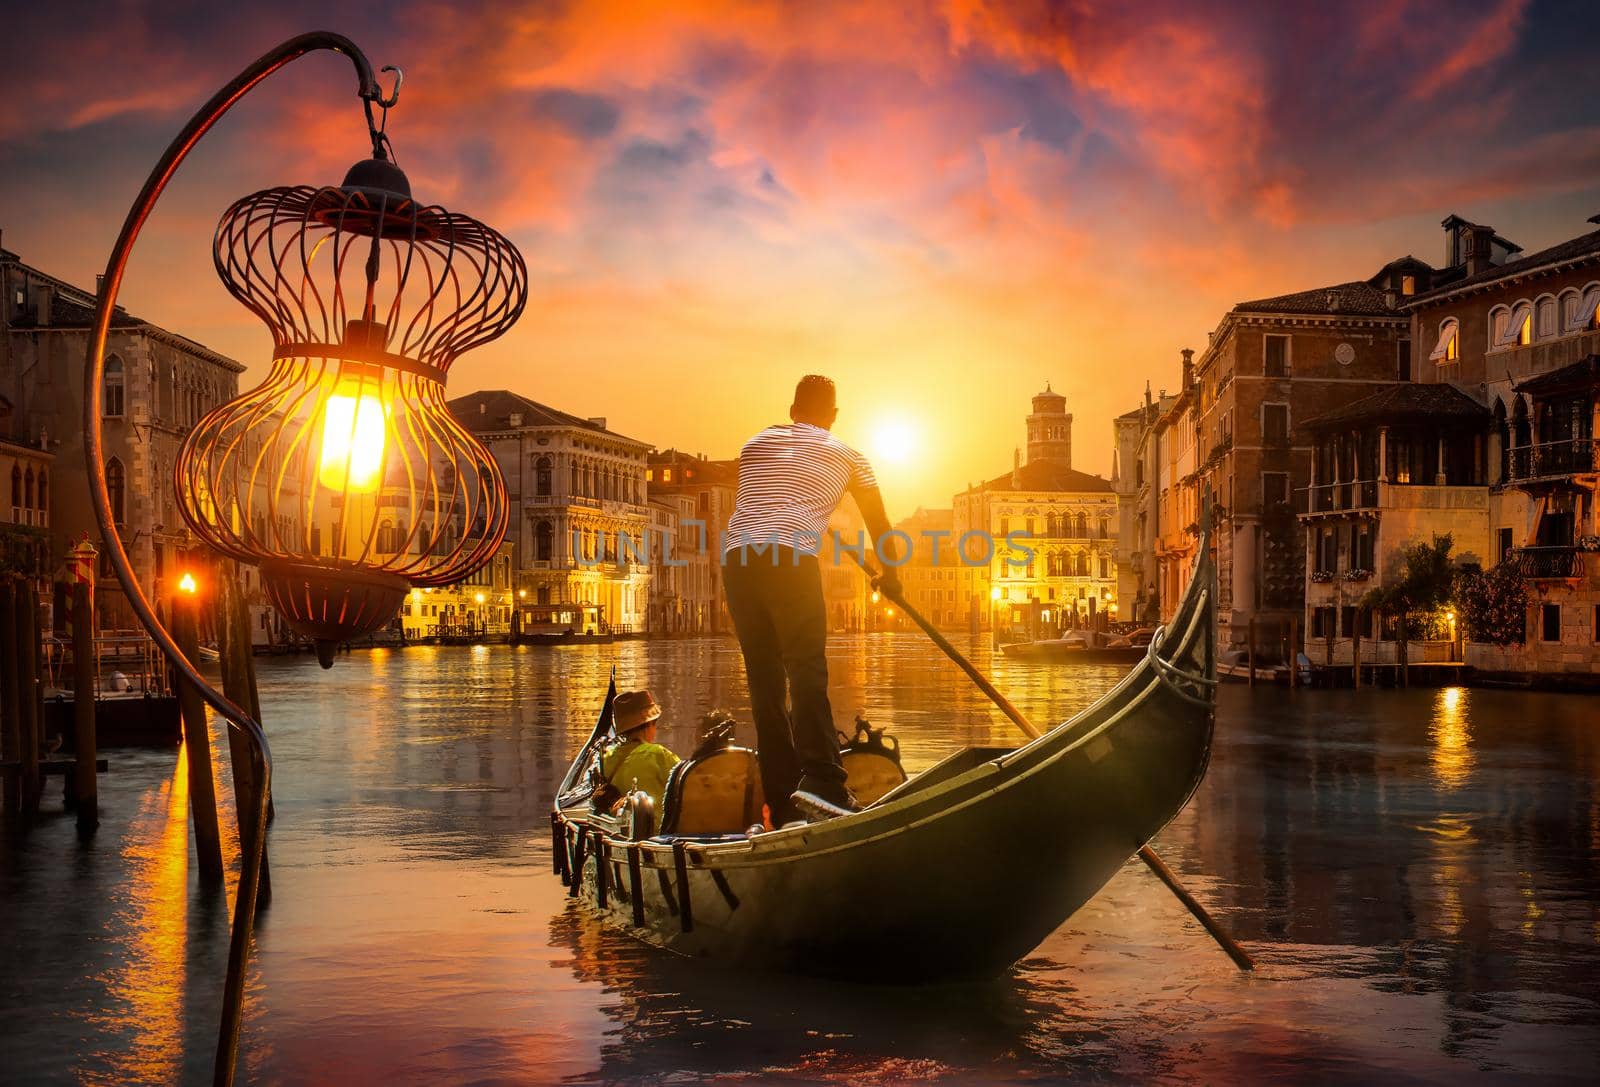 Gondolier at sunset by Givaga